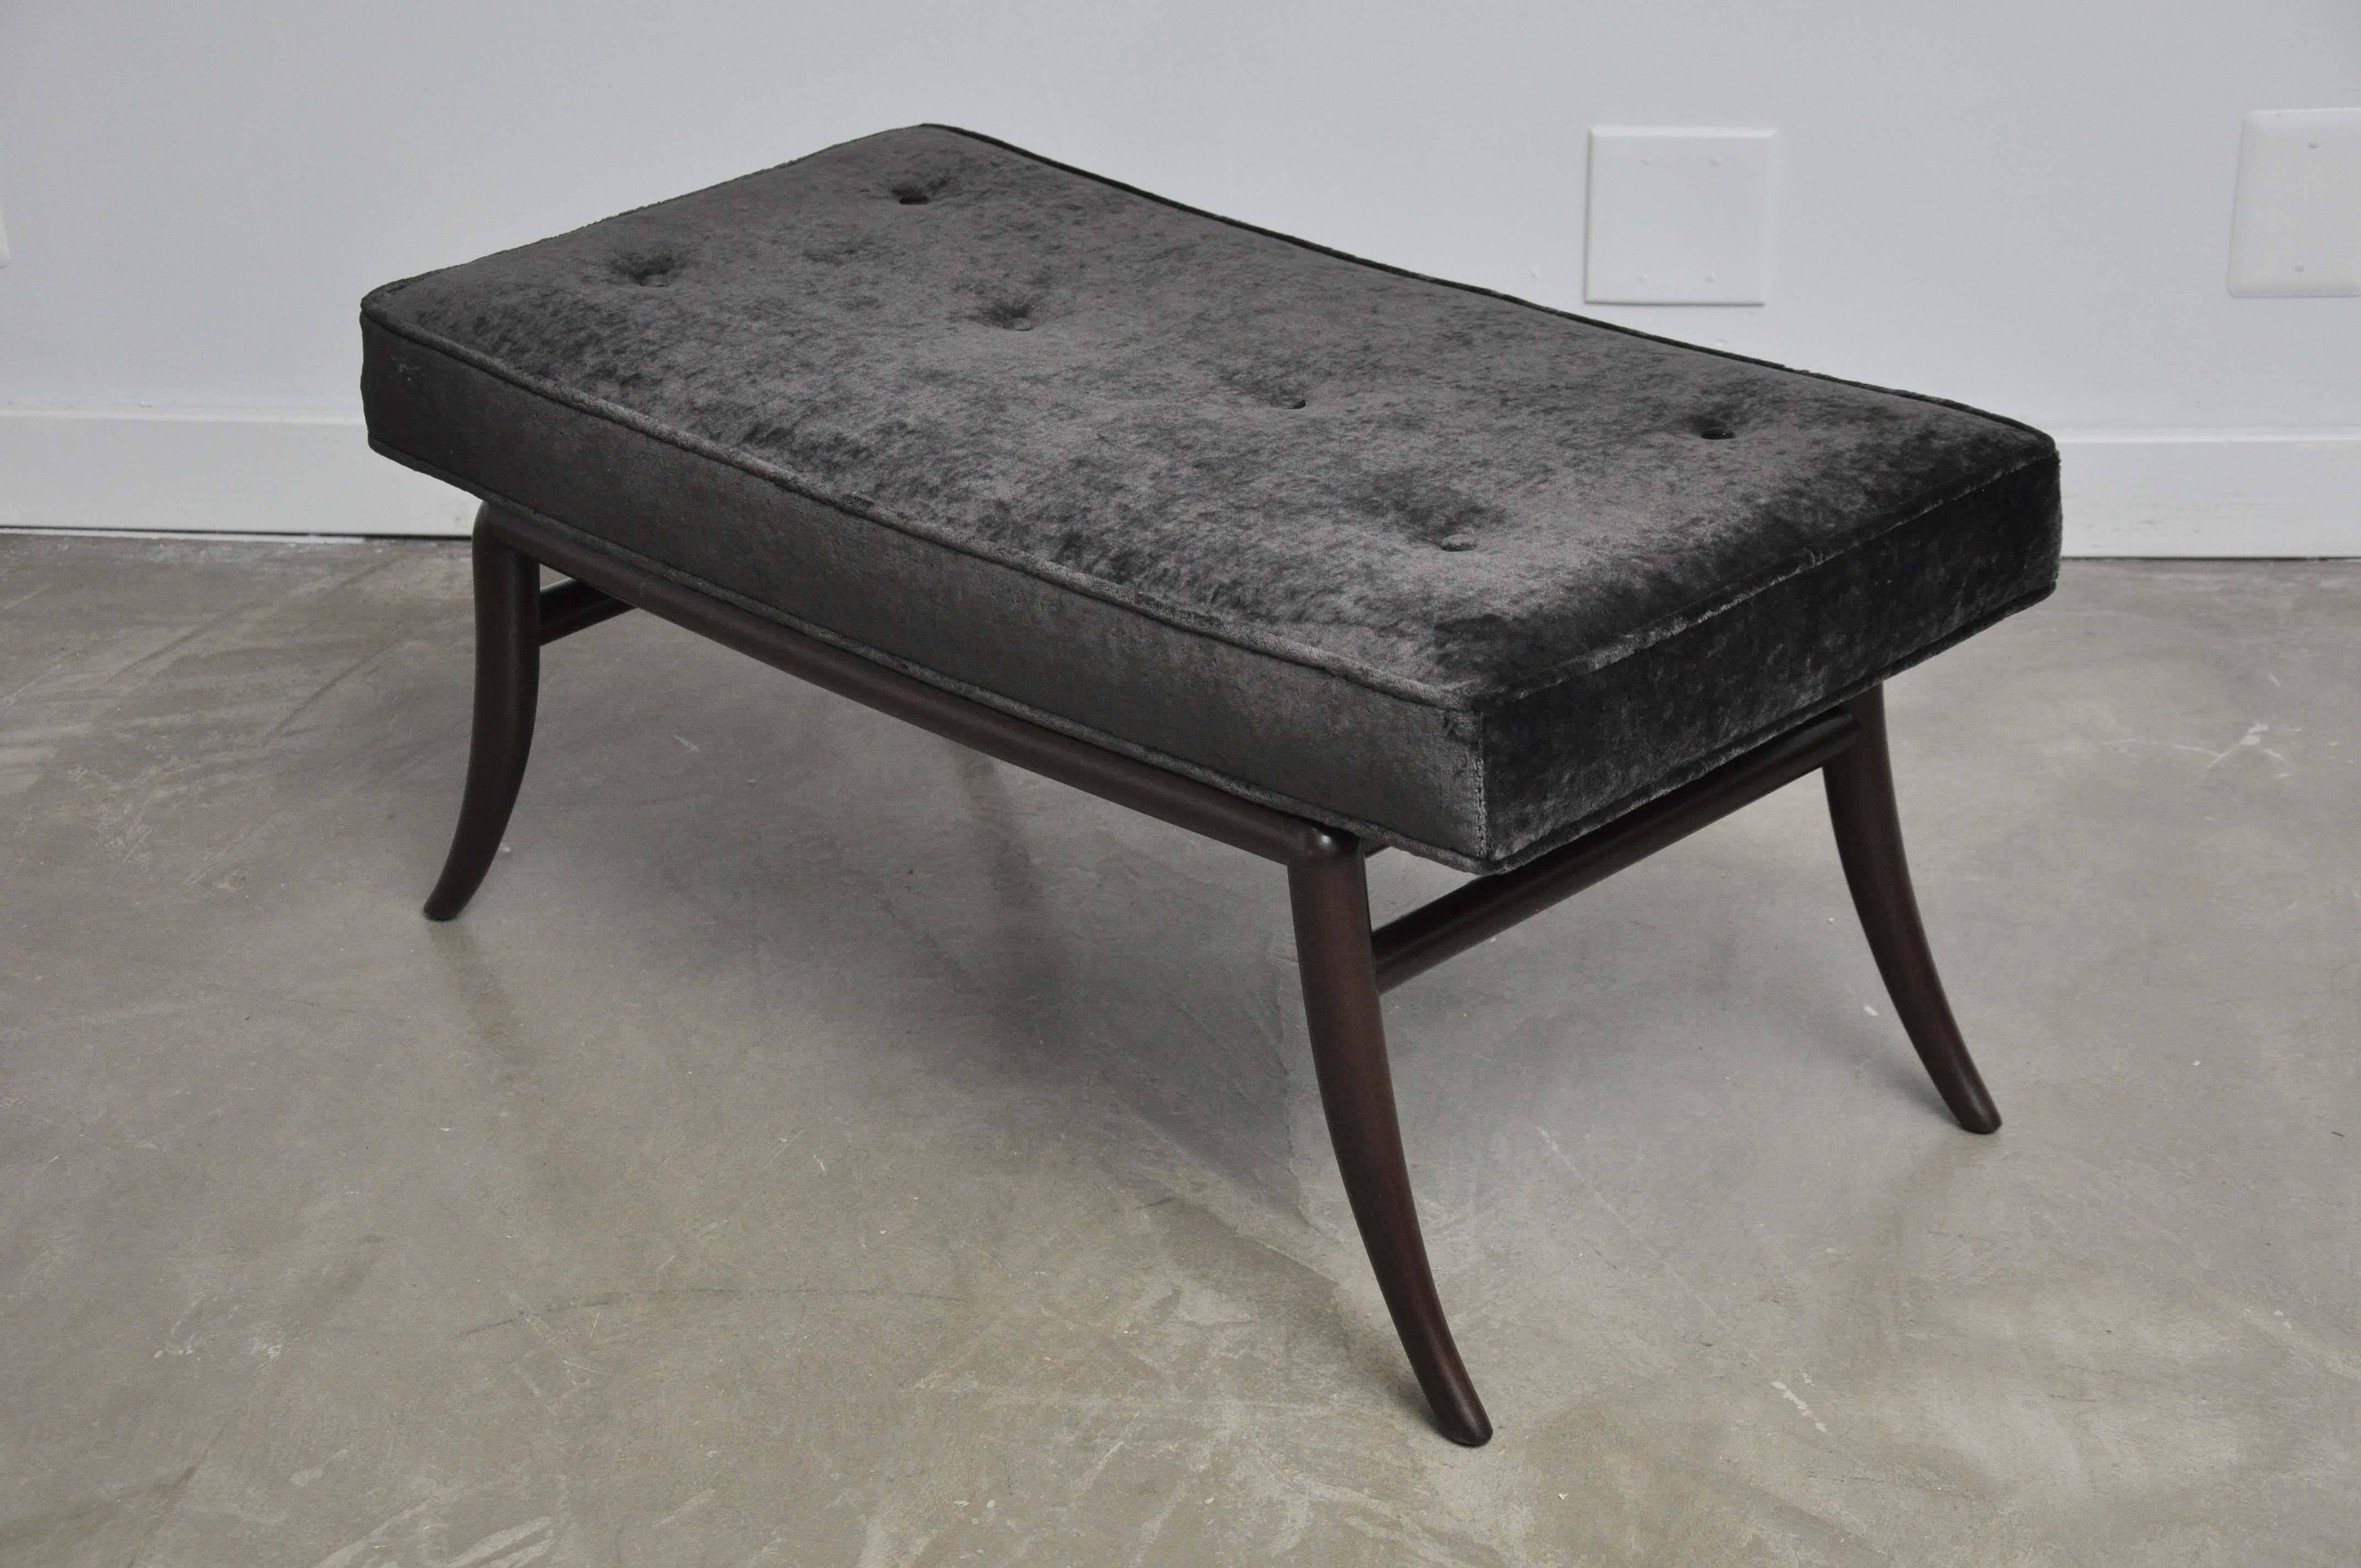 Sabre leg bench by T.H. Robsjohn-Gibbings. Fully restored. Newly upholstered over refinished espresso tone base.